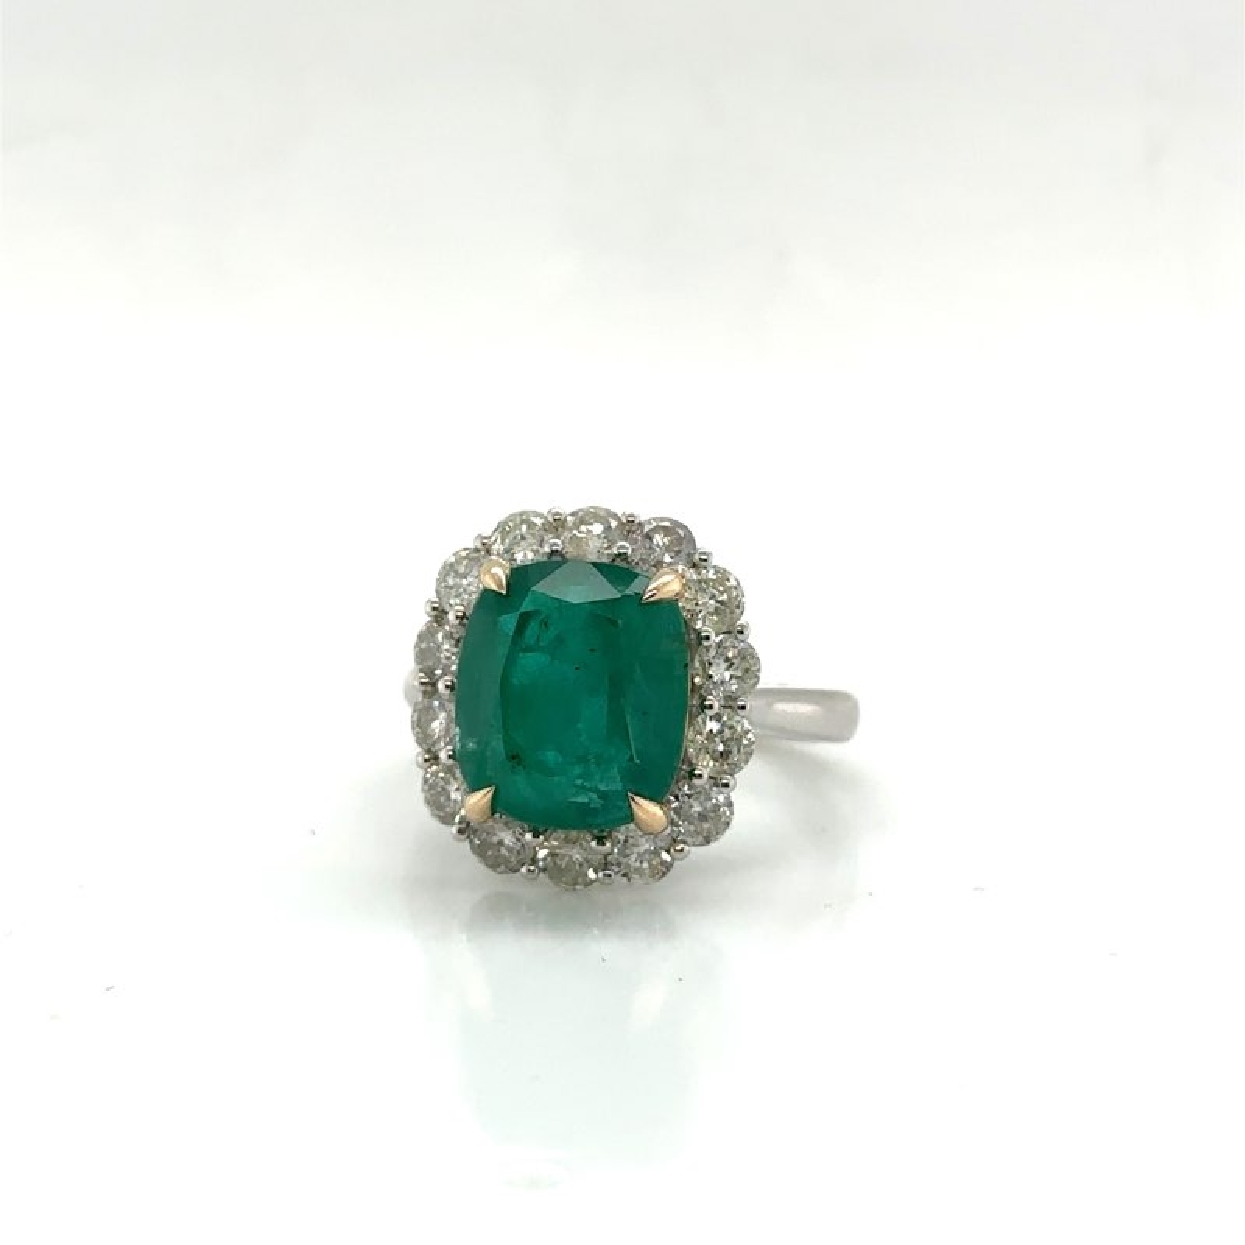 14K White and Yellow Gold with a Cushion Cut Emerald 5.99 ct and Diamond Halo 1.5 ct 
Size 7